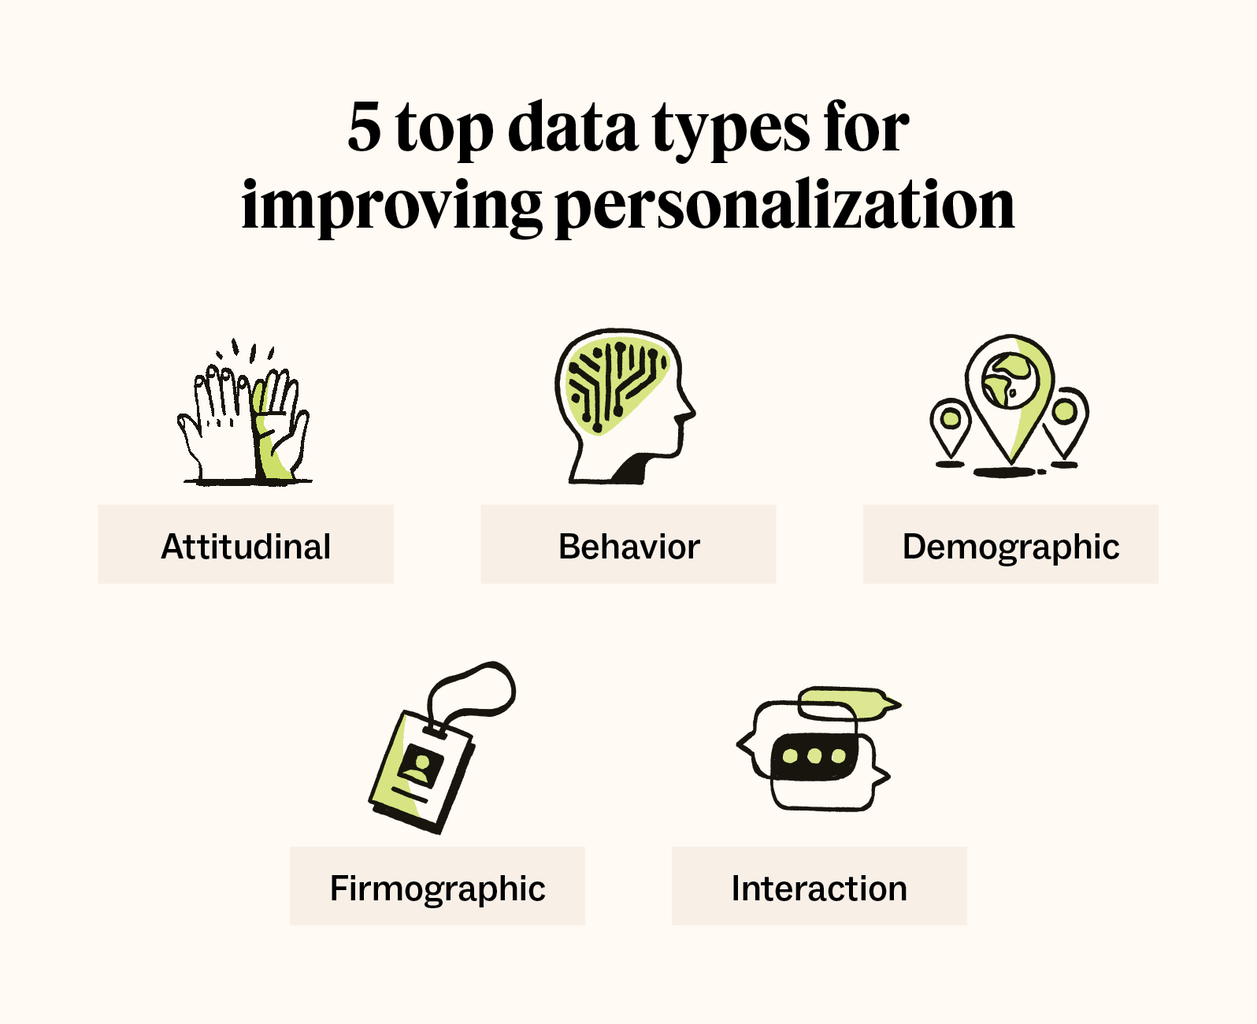 5 top data types for improving personalization